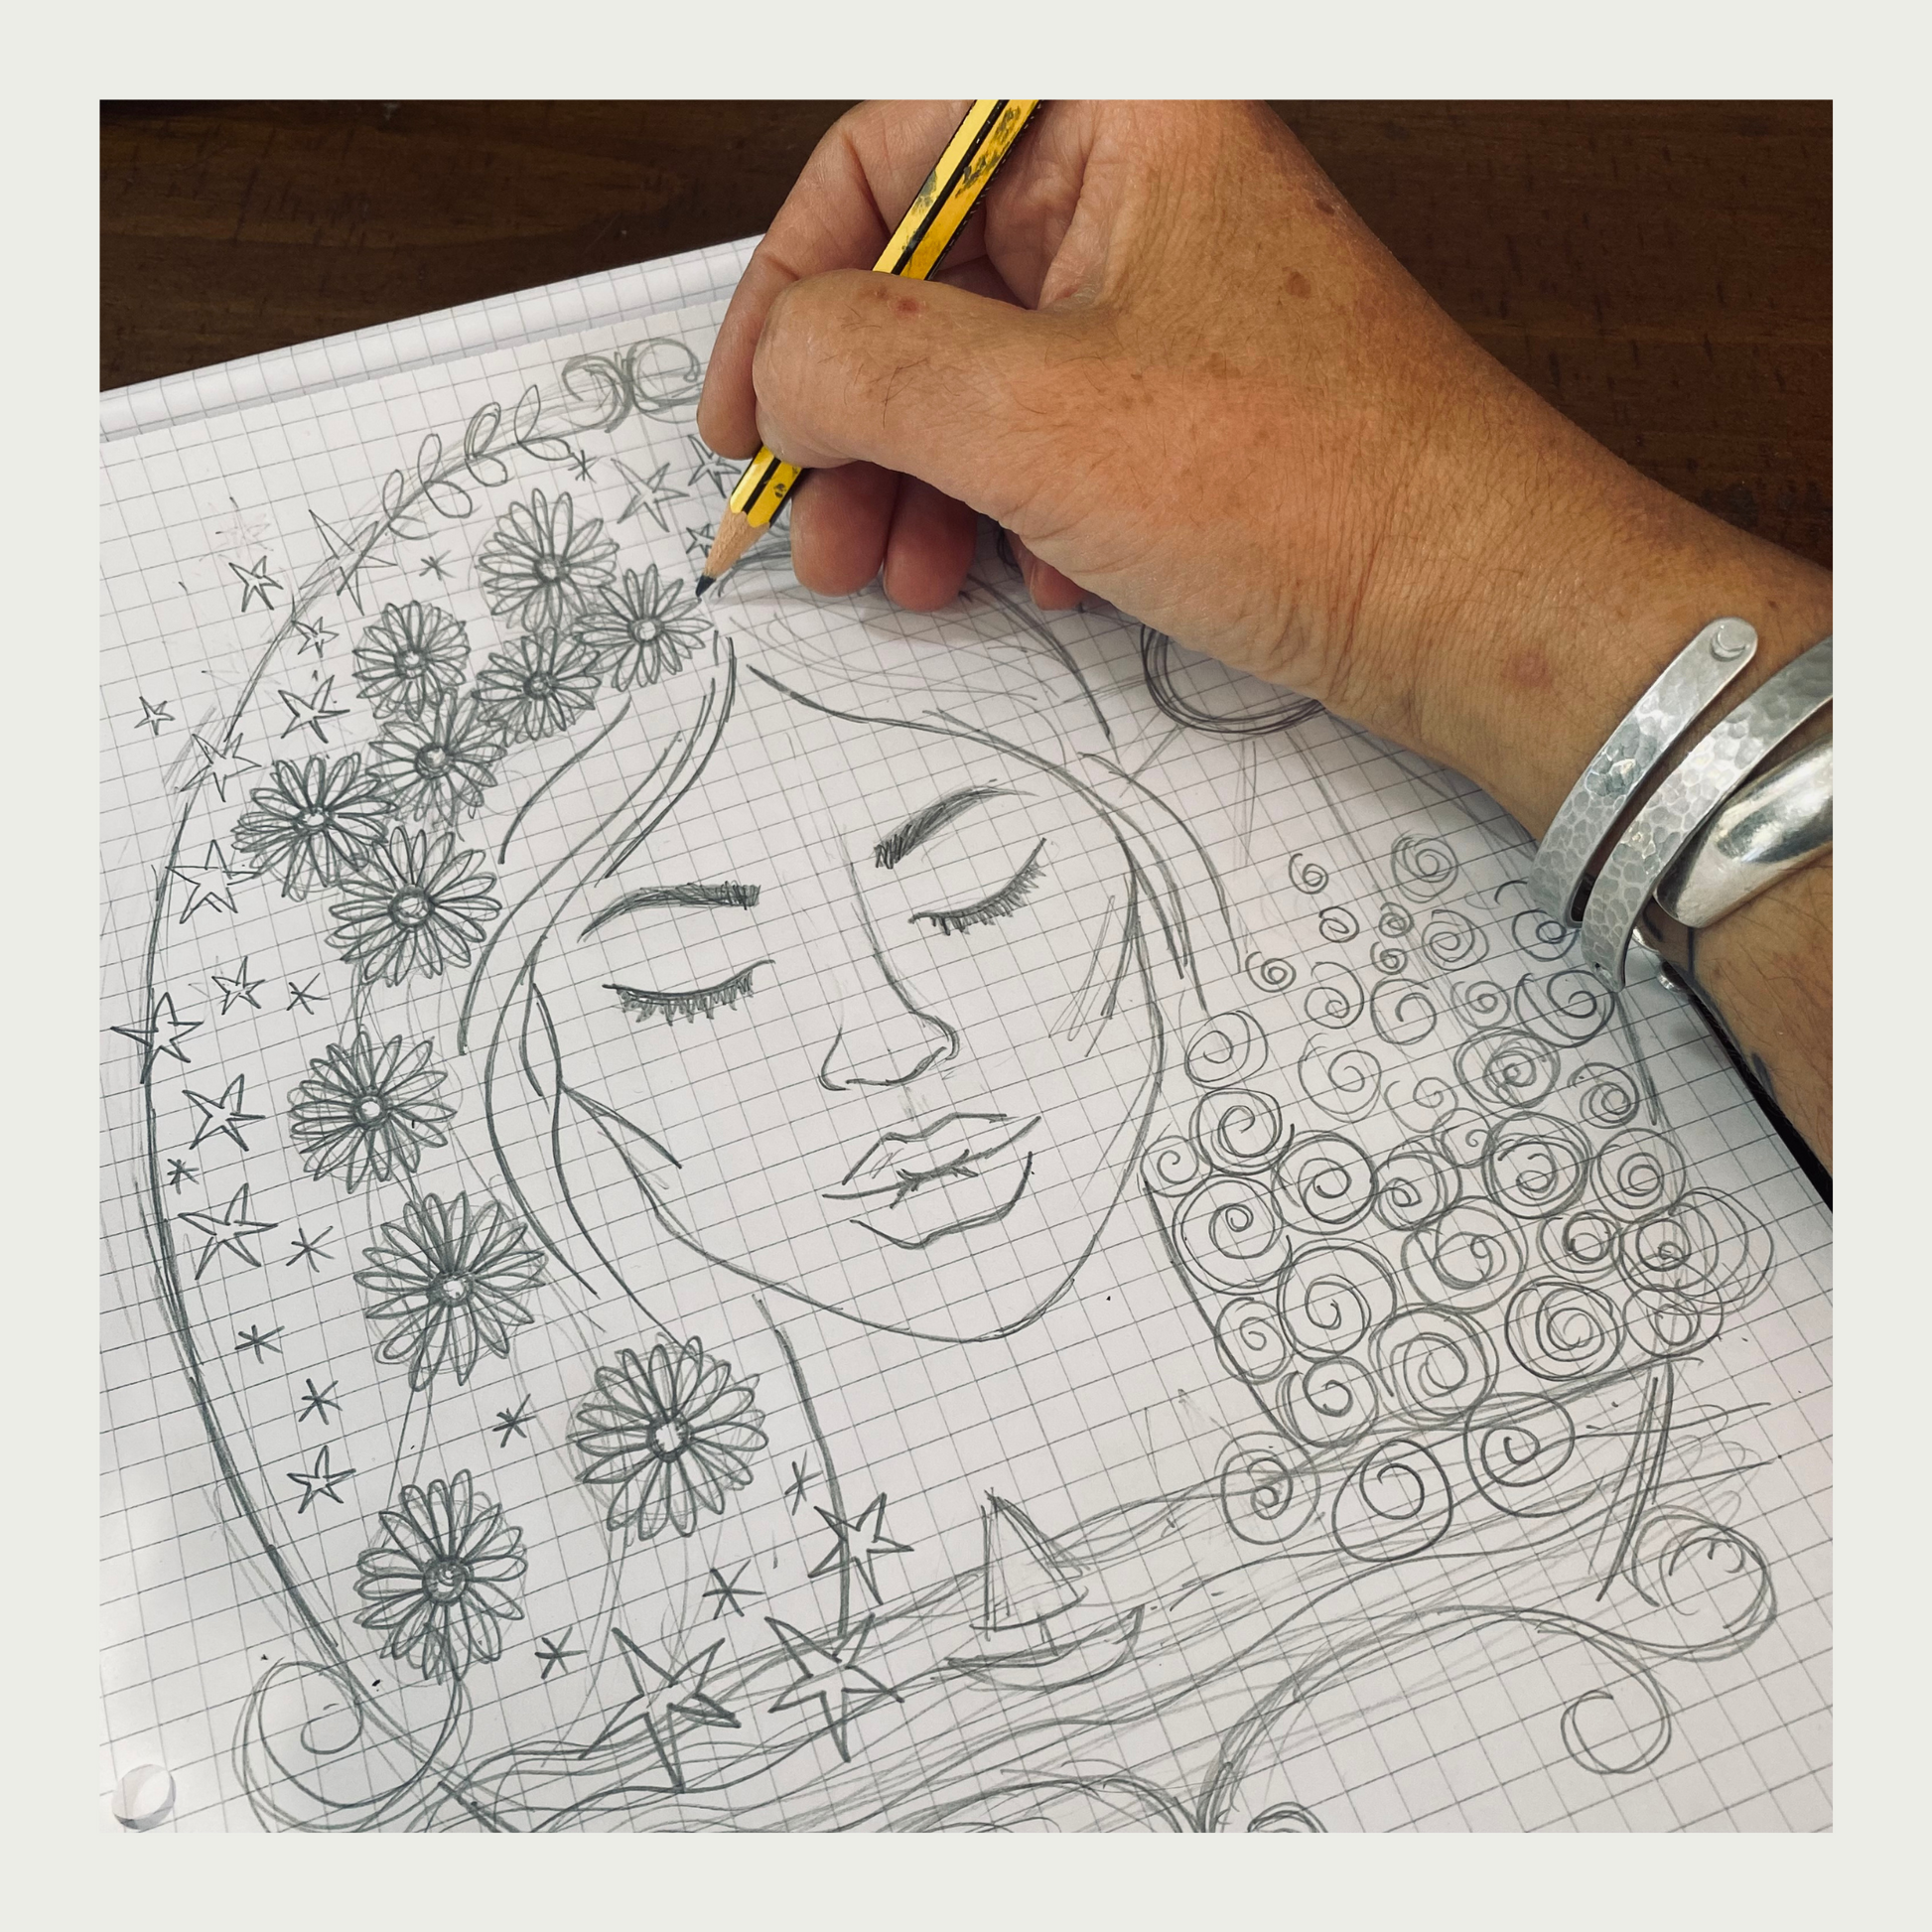 A pencil drawing of a woman's face surrounded by flowers and waves.